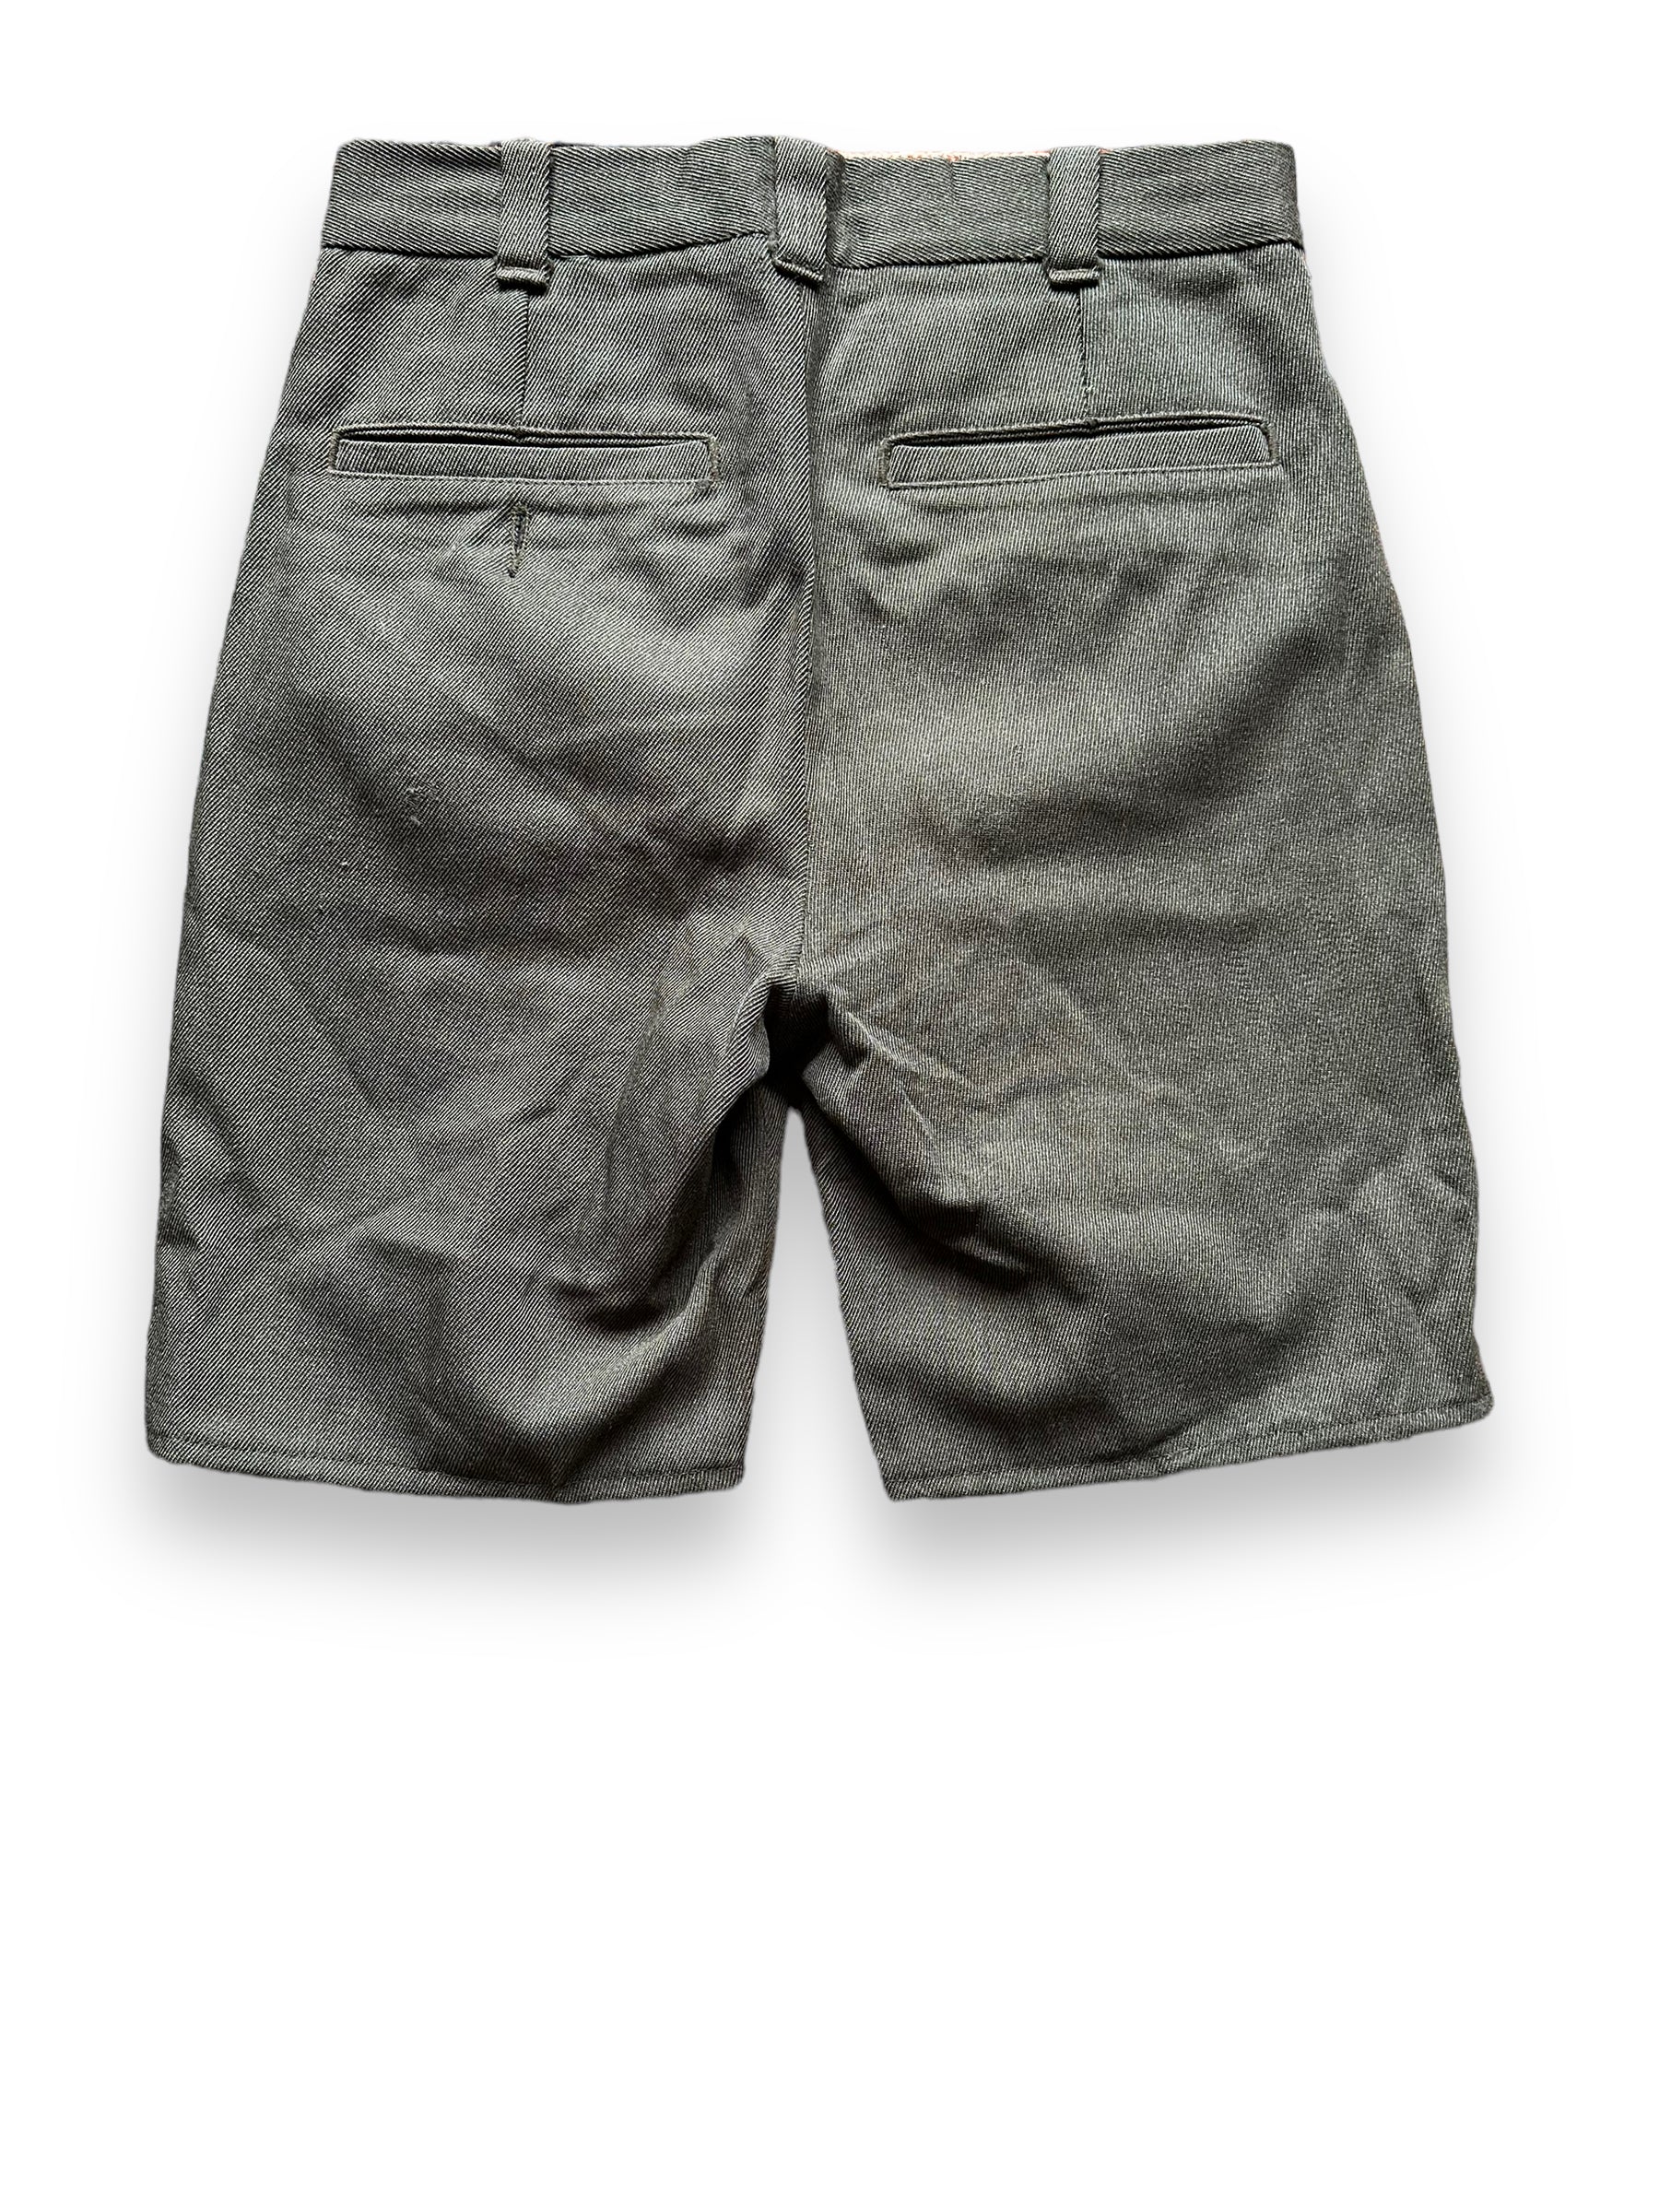 Rear View of Vintage Filson Whipcord Shorts W30 |  Barn Owl Vintage Goods | Vintage Filson Workwear Seattle